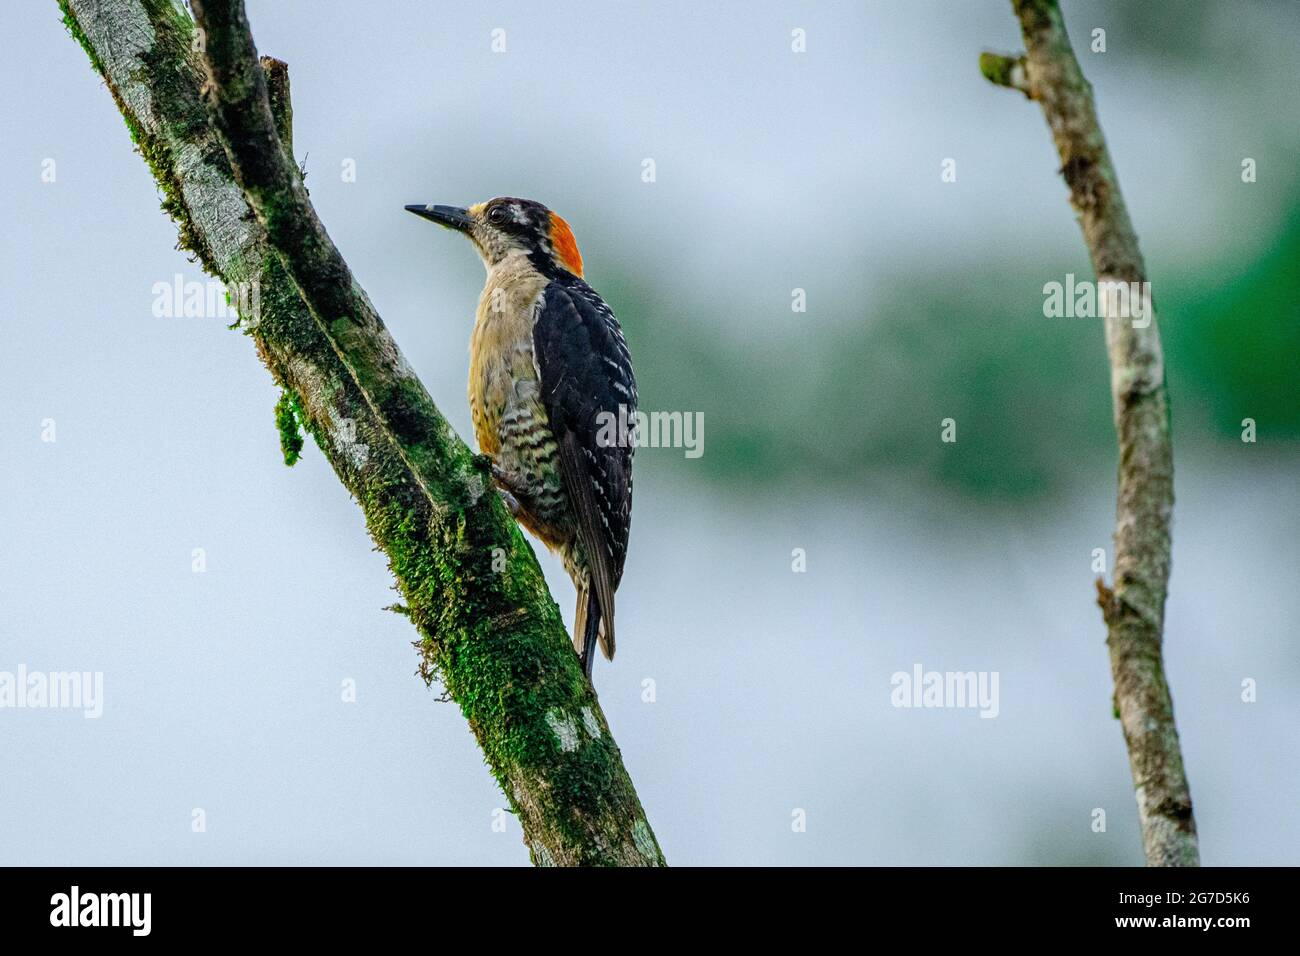 The black-cheeked woodpecker (Melanerpes pucherani) is a resident breeding bird from southeastern Mexico south to western Ecuador. This woodpecker occ Stock Photo